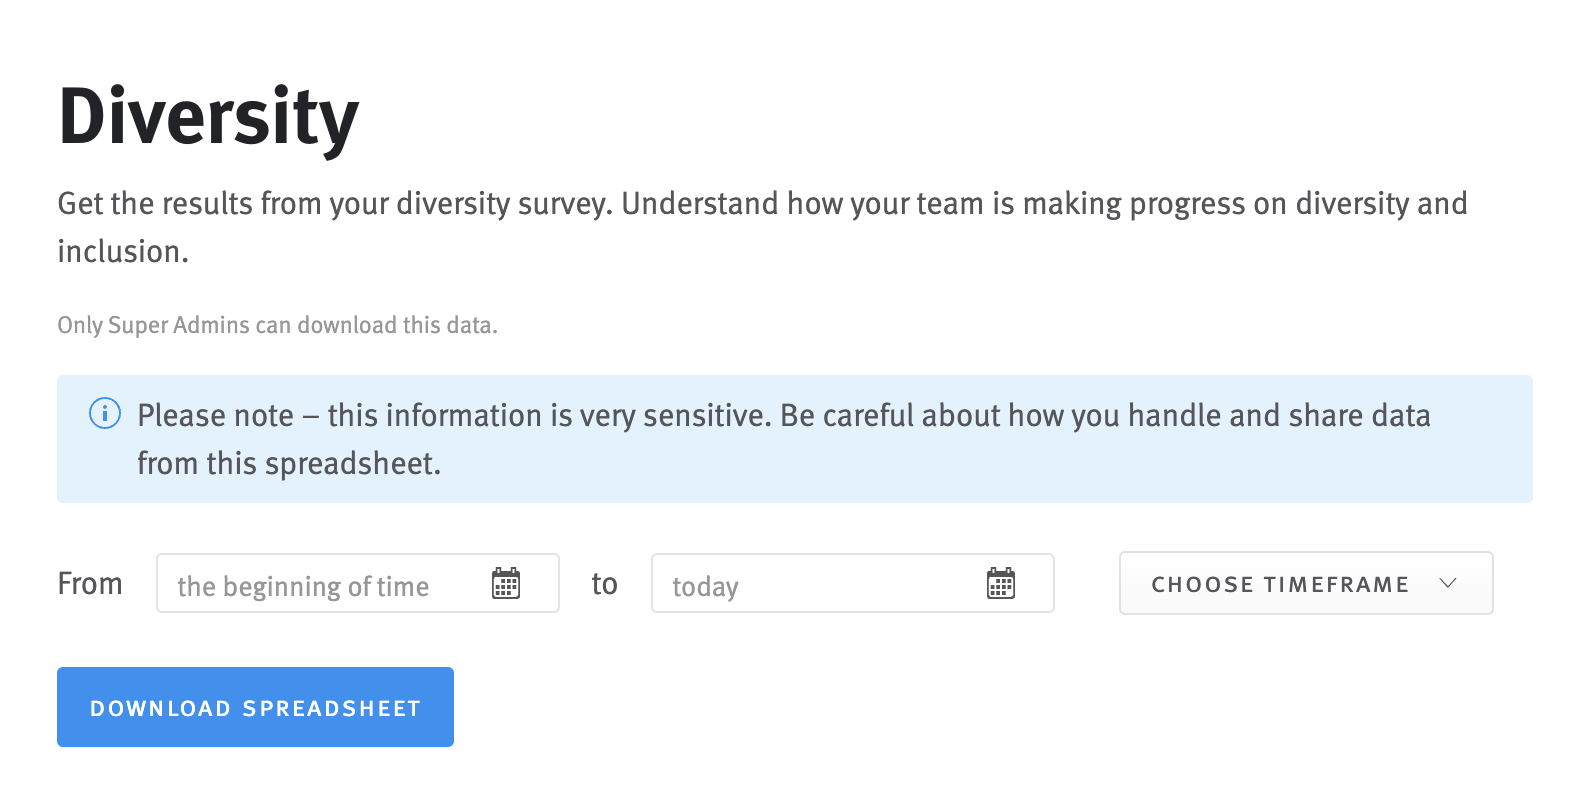 Diversity surveys page with time frame option and download spreadsheet button